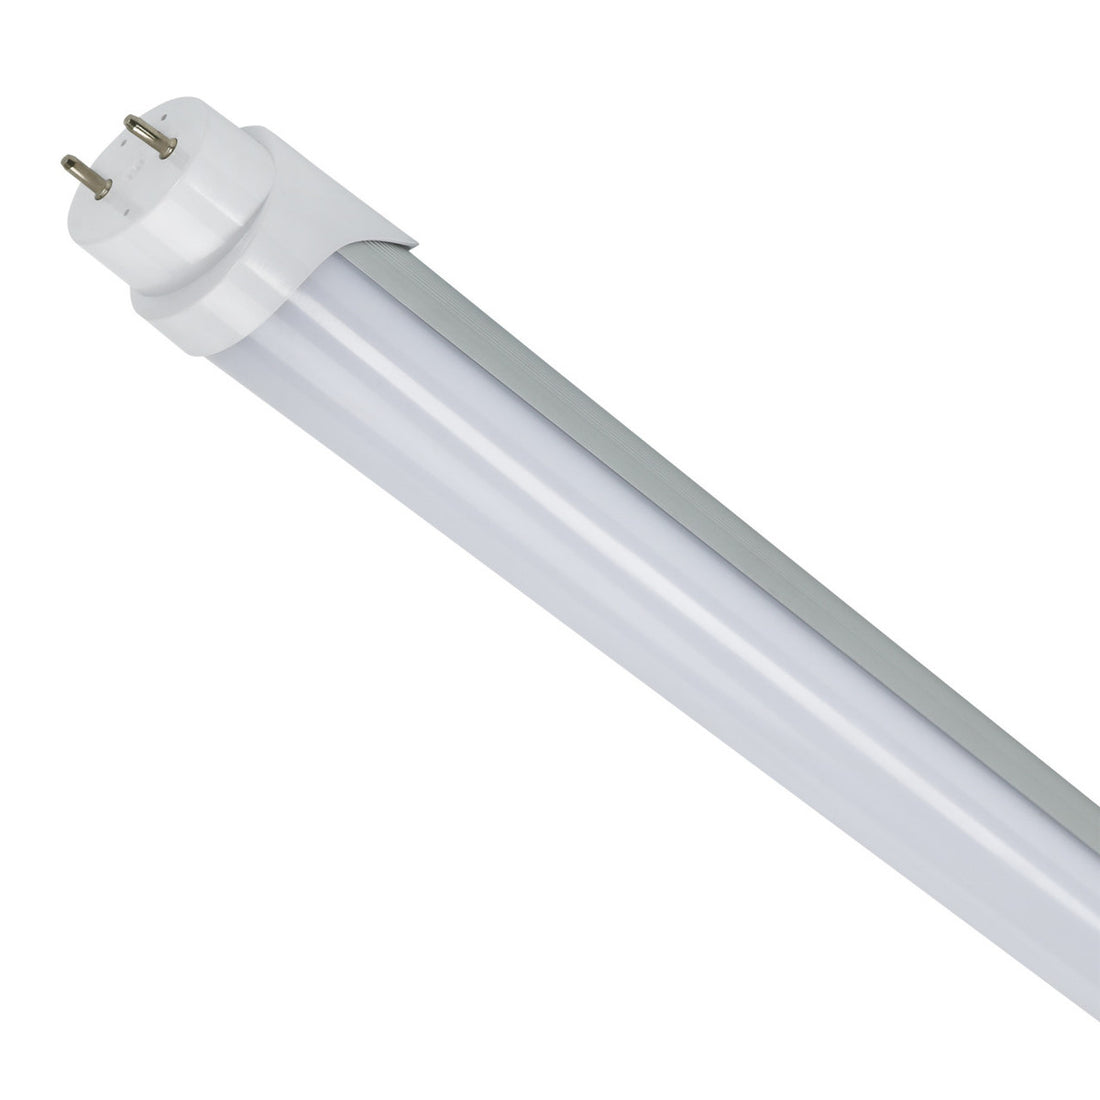 Wattage-Tunable 4ft LED Tube - 20W/18W/15W, 5000K, 100-277VAC Input, Switch Dimming, 140¬∞ Beam Angle, Frosted Lens, Circular Aluminum Housing, Two-End Input - 42 Pack